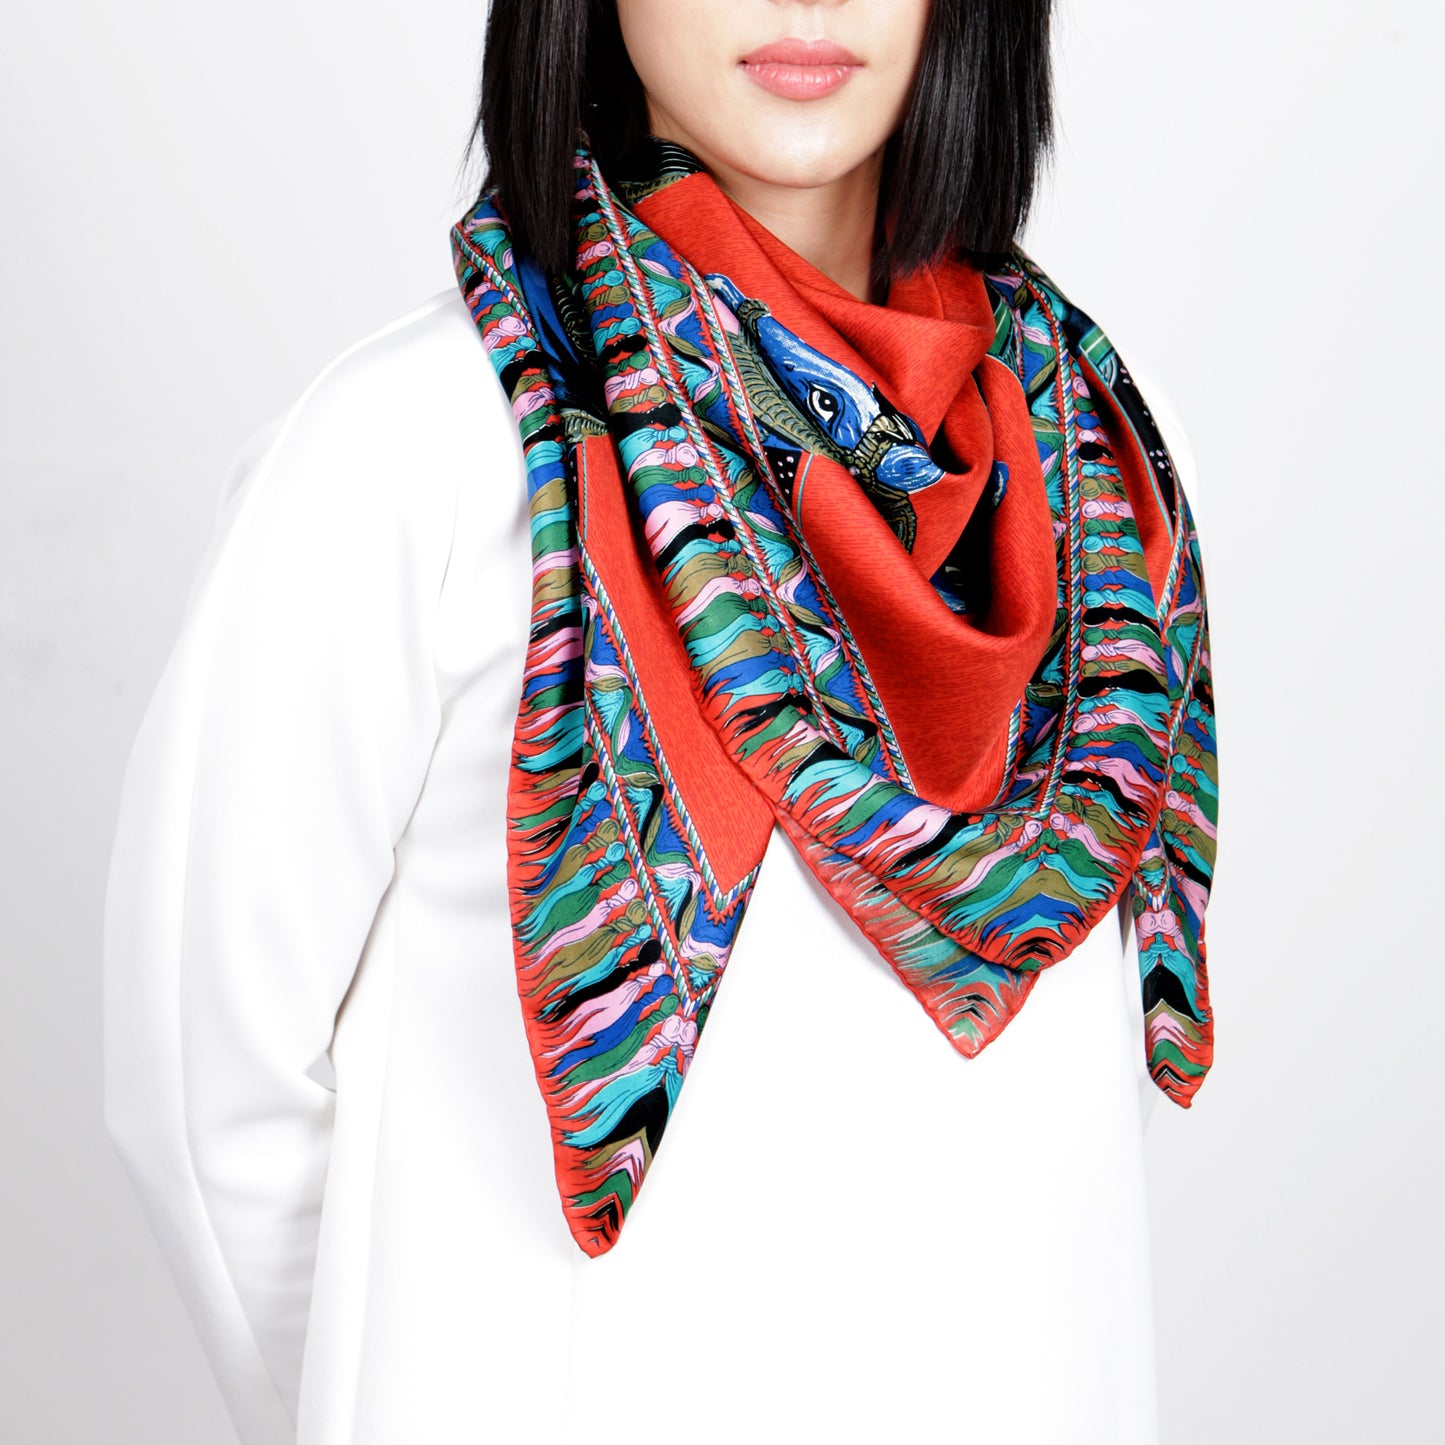 Silkhorse Signature Limited Edition Scarf - Parekh Bugbee